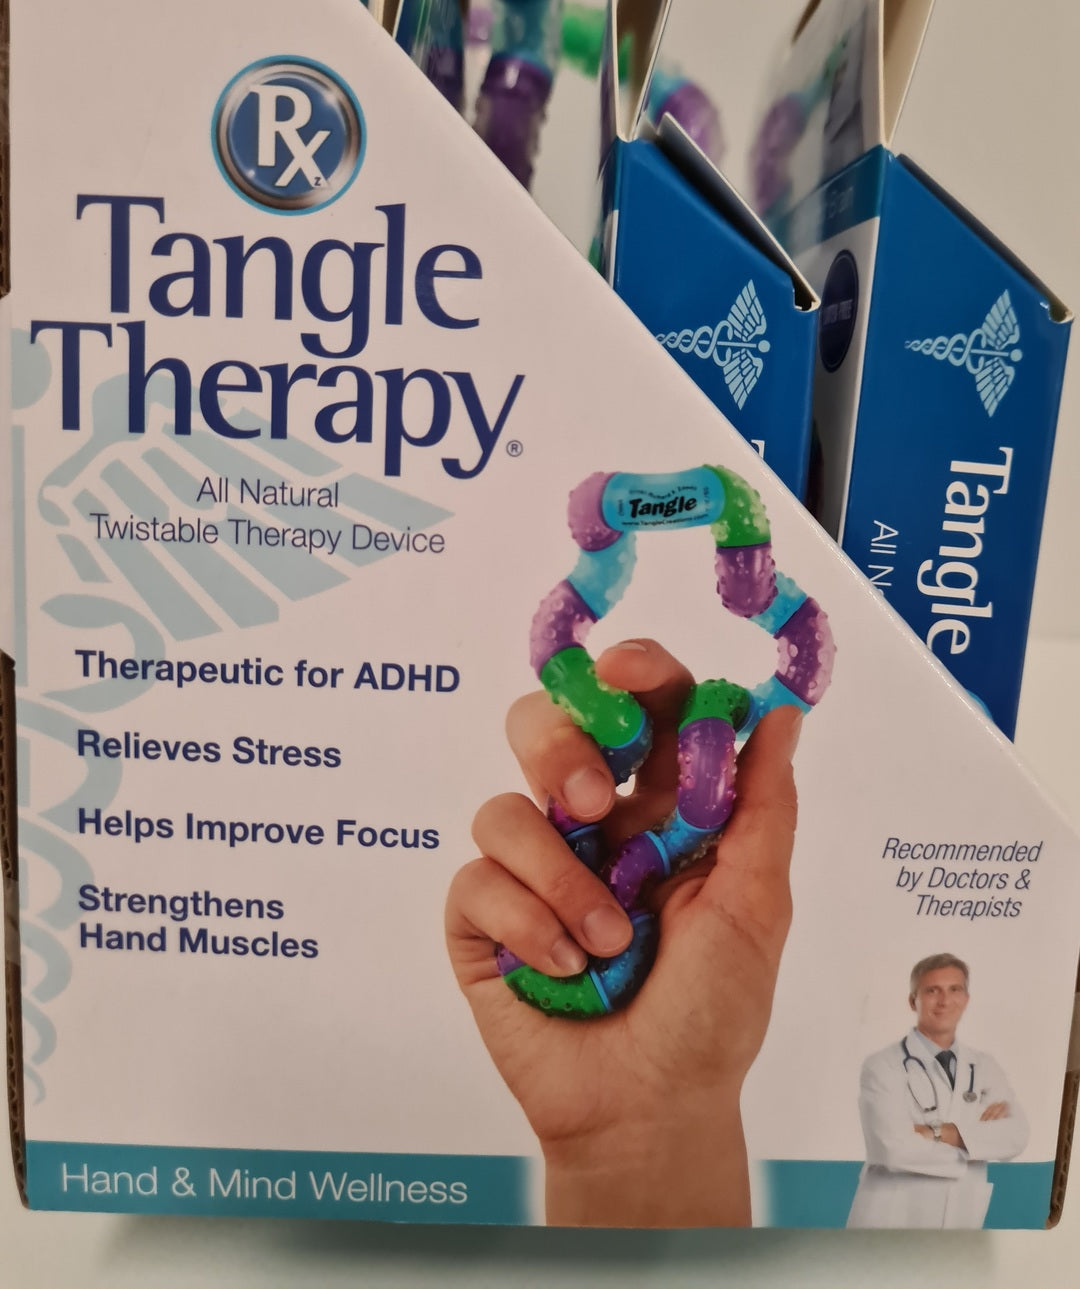 Tangle Therapy